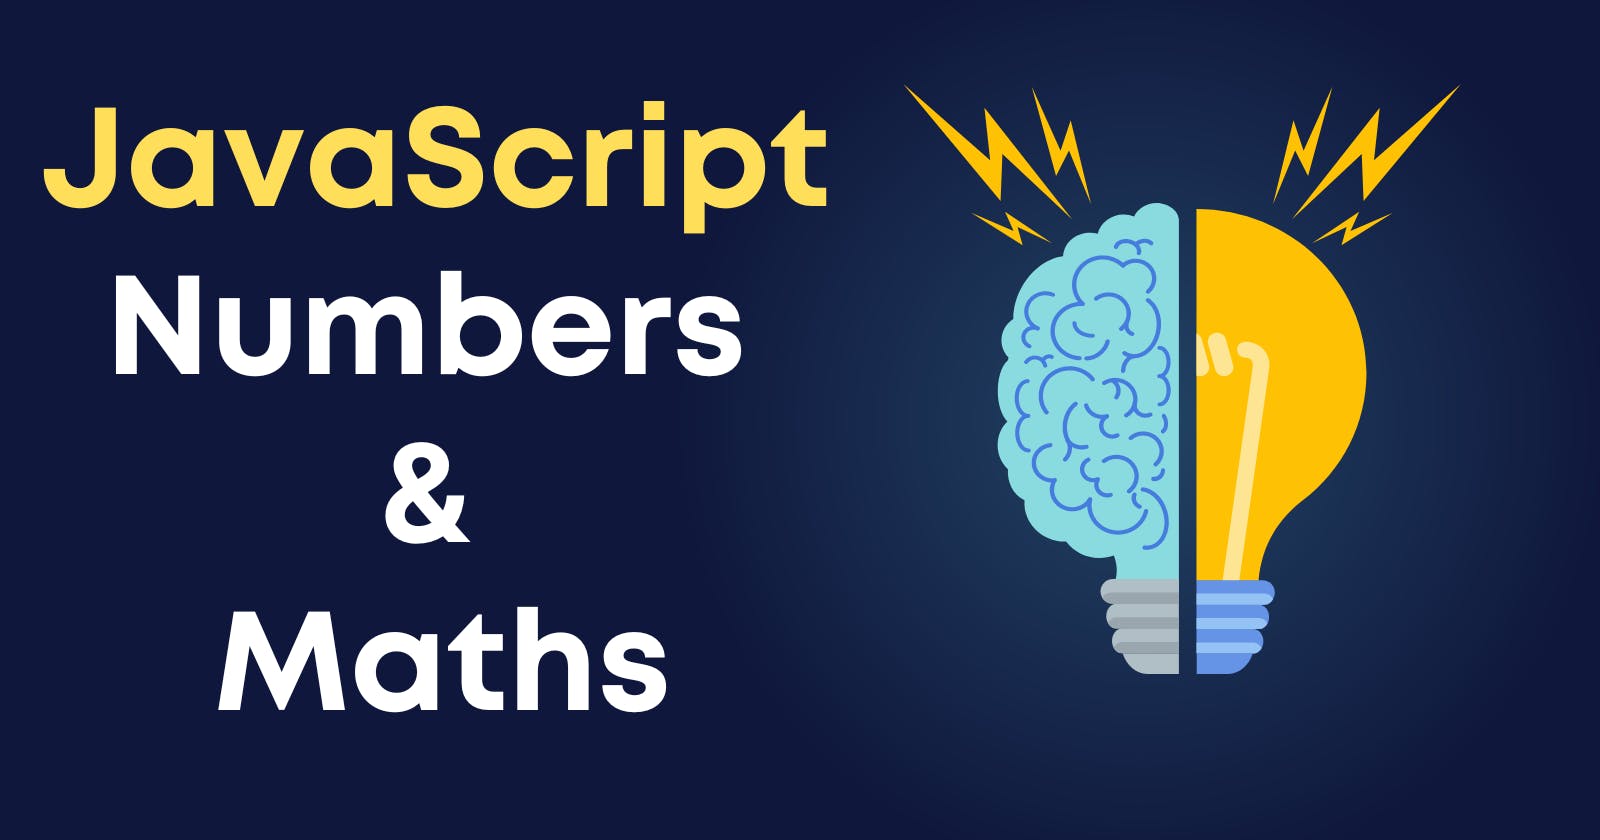 A JavaScript Developer Must know these Number & Maths Methods